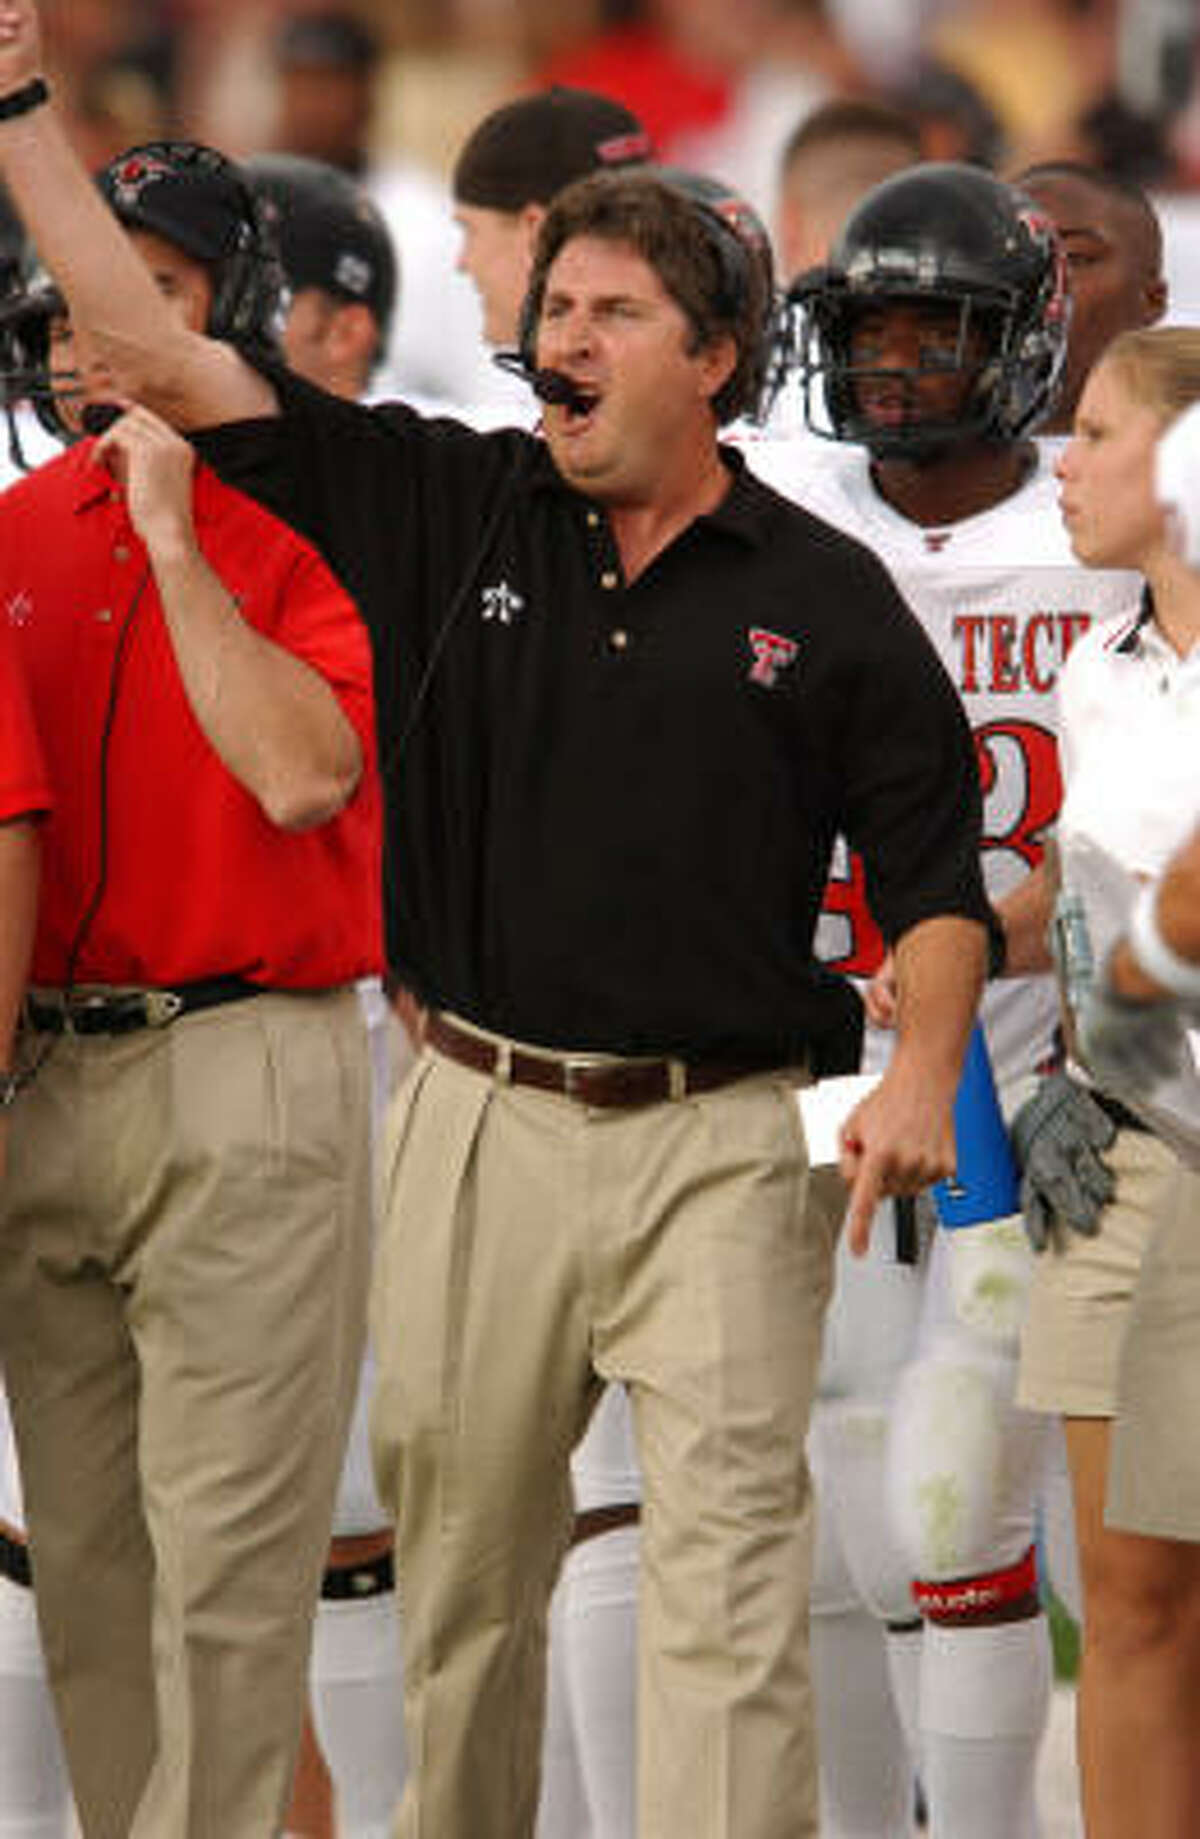 Mike Leach reacts during a 49-0 non-conference victory over New Mexico in 2002.